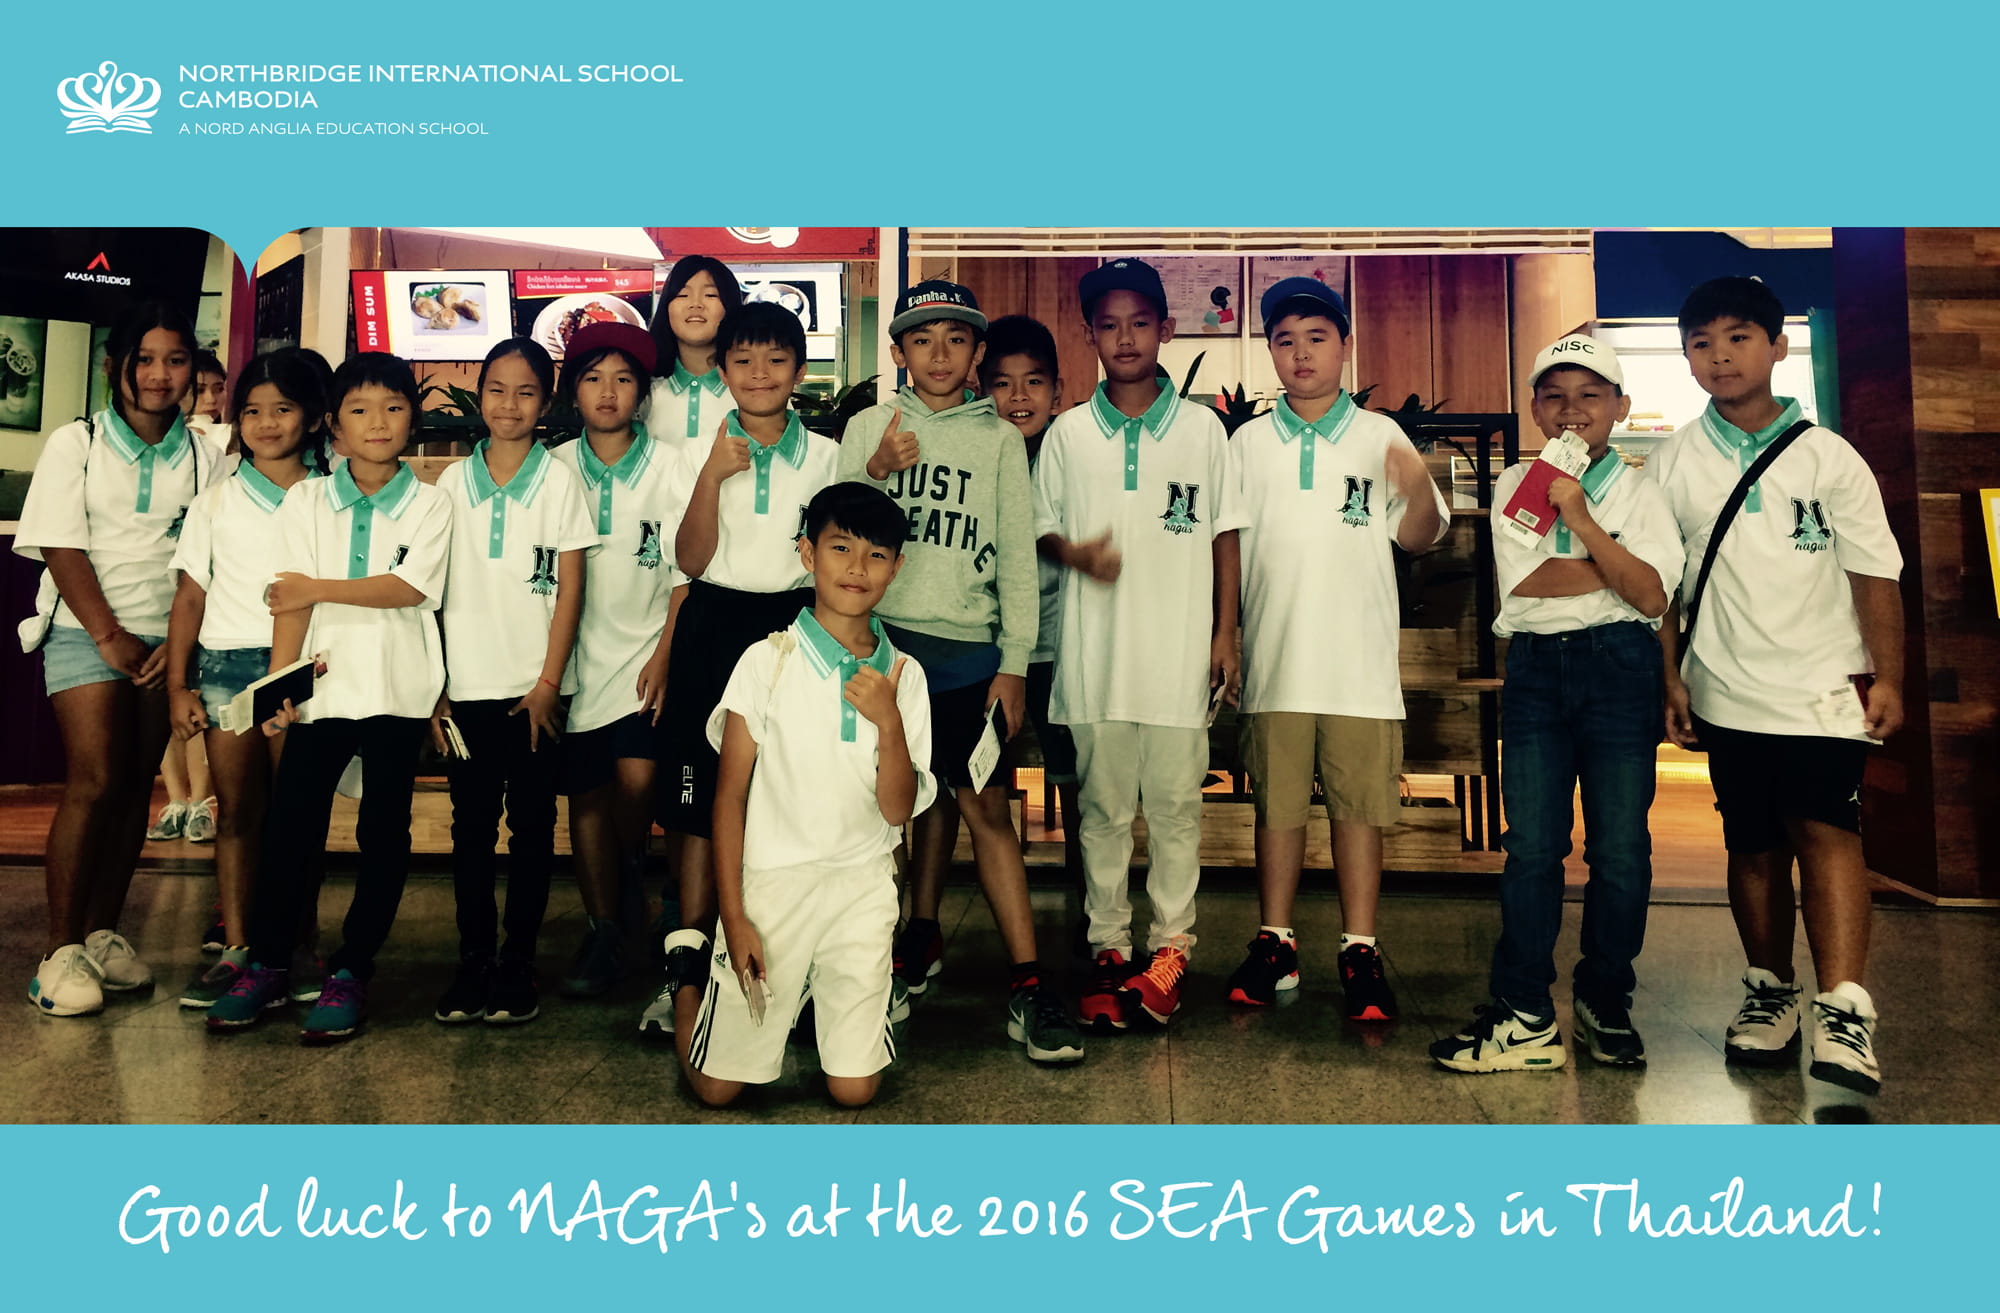 South East Asia Games | Northbridge International School Cambodia-inaugural-south-east-asia-games-NagasSEAgames2016